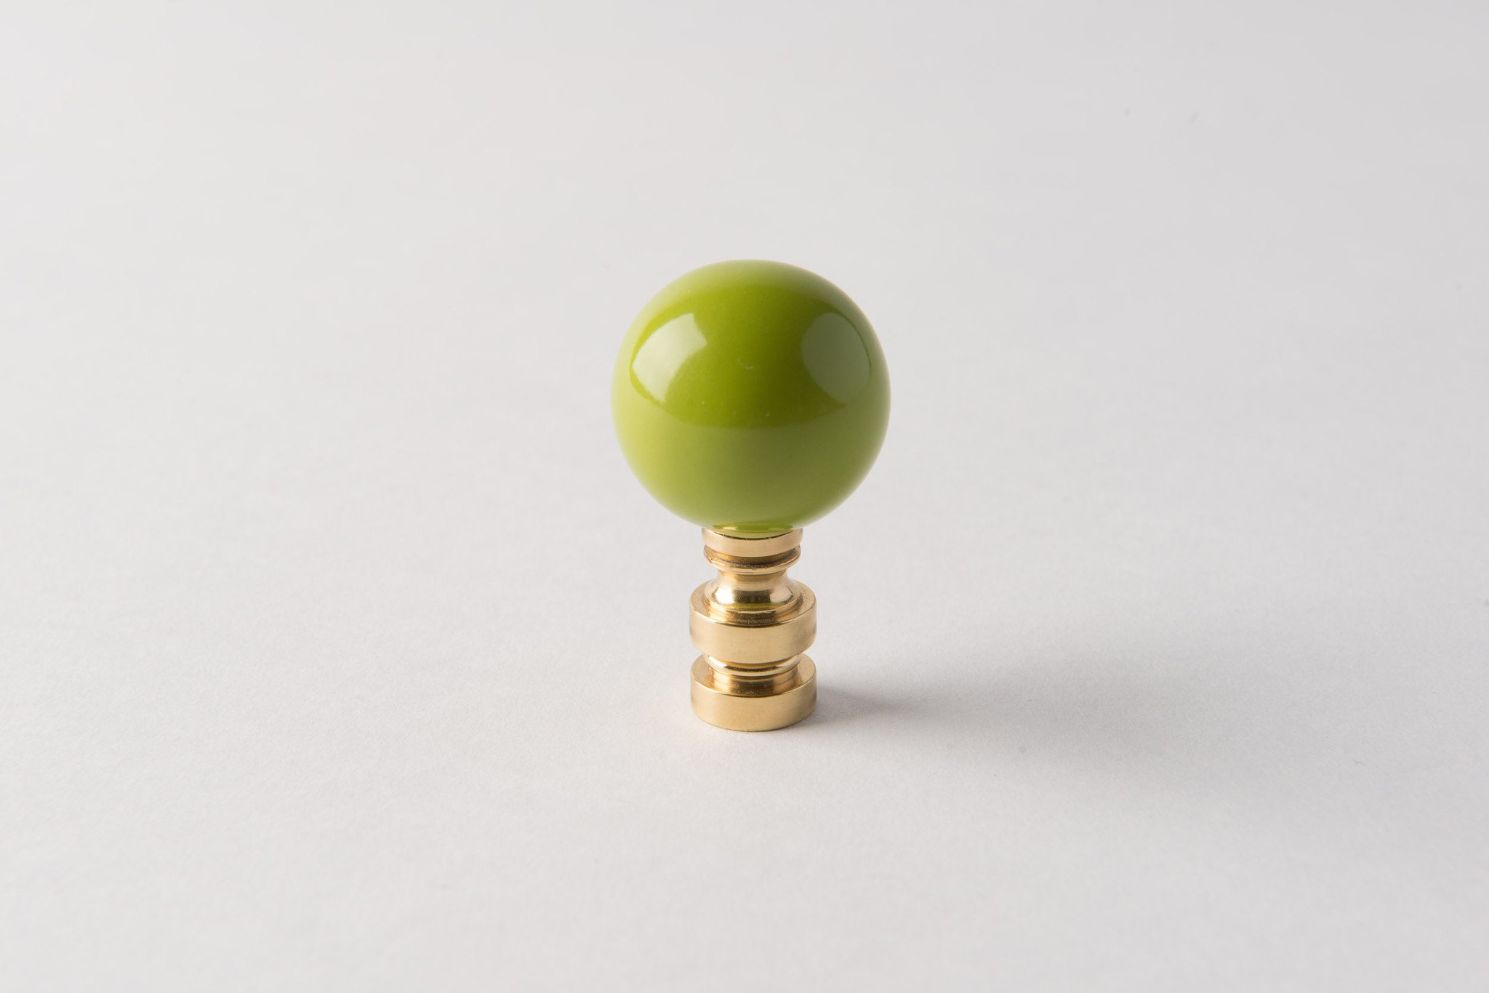 https://www.hotel-lamps.com/resources/assets/images/product_images/Ceramic Ball (Kiwi Green) 30mm.jpg